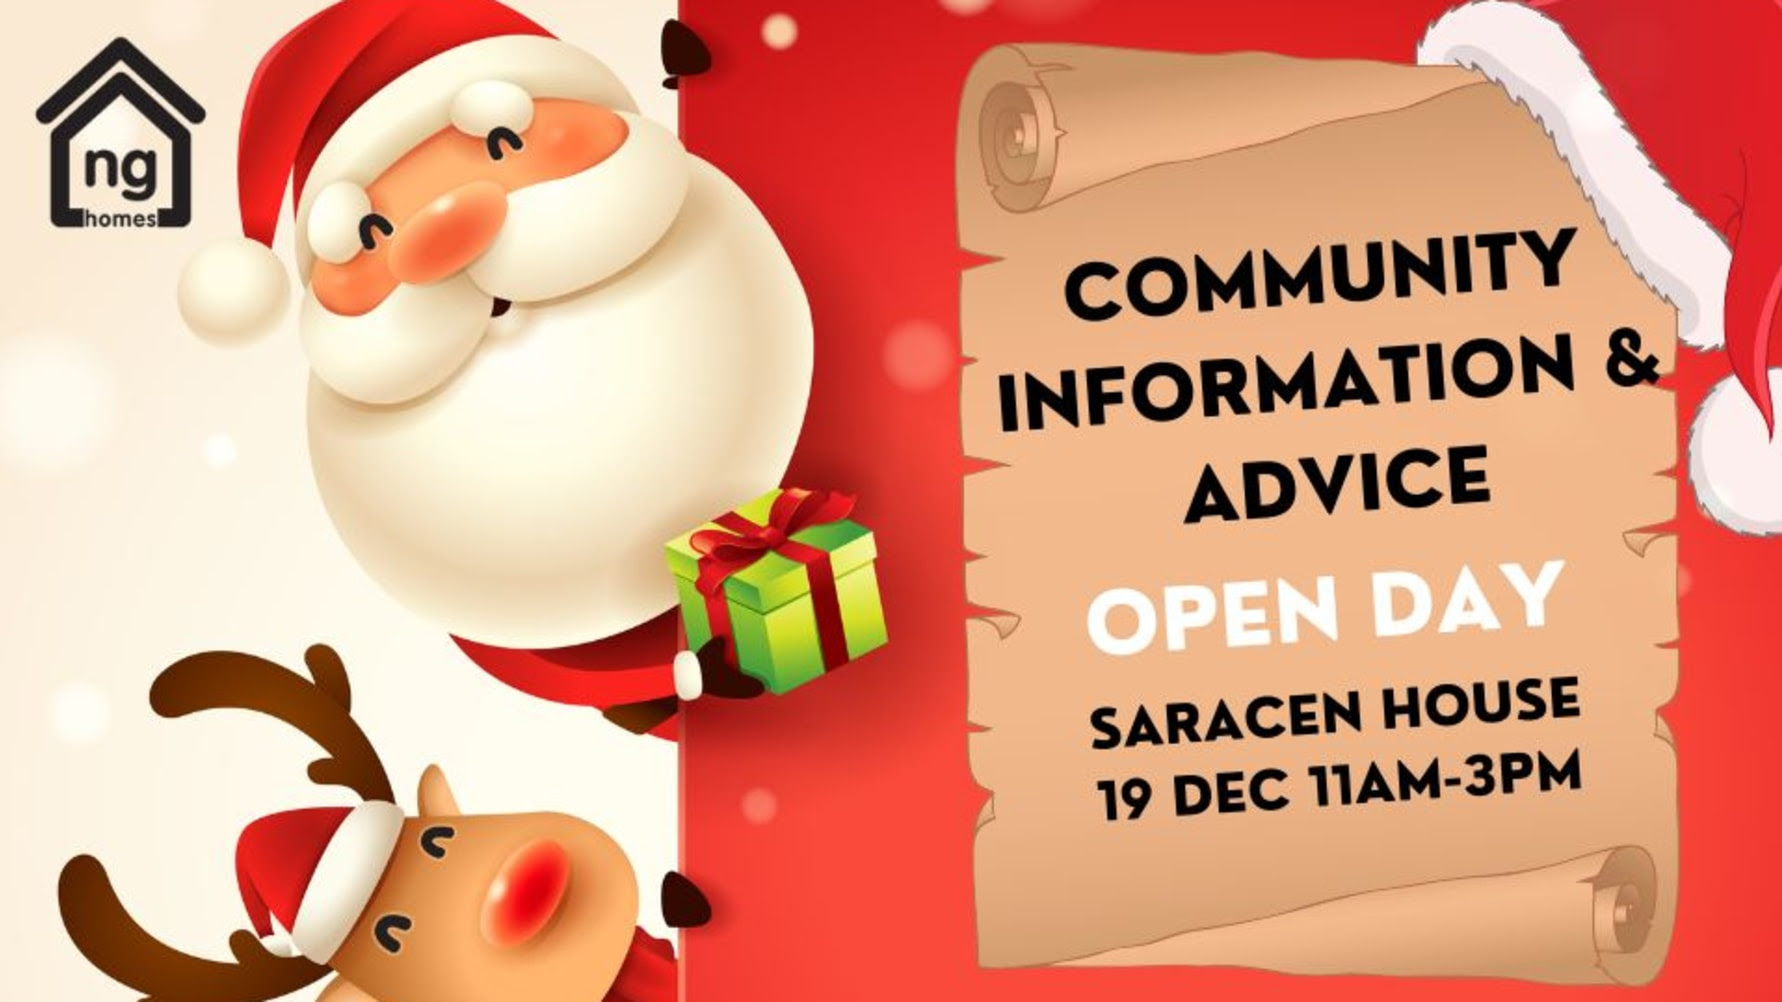 ng homes to host community information and advice day